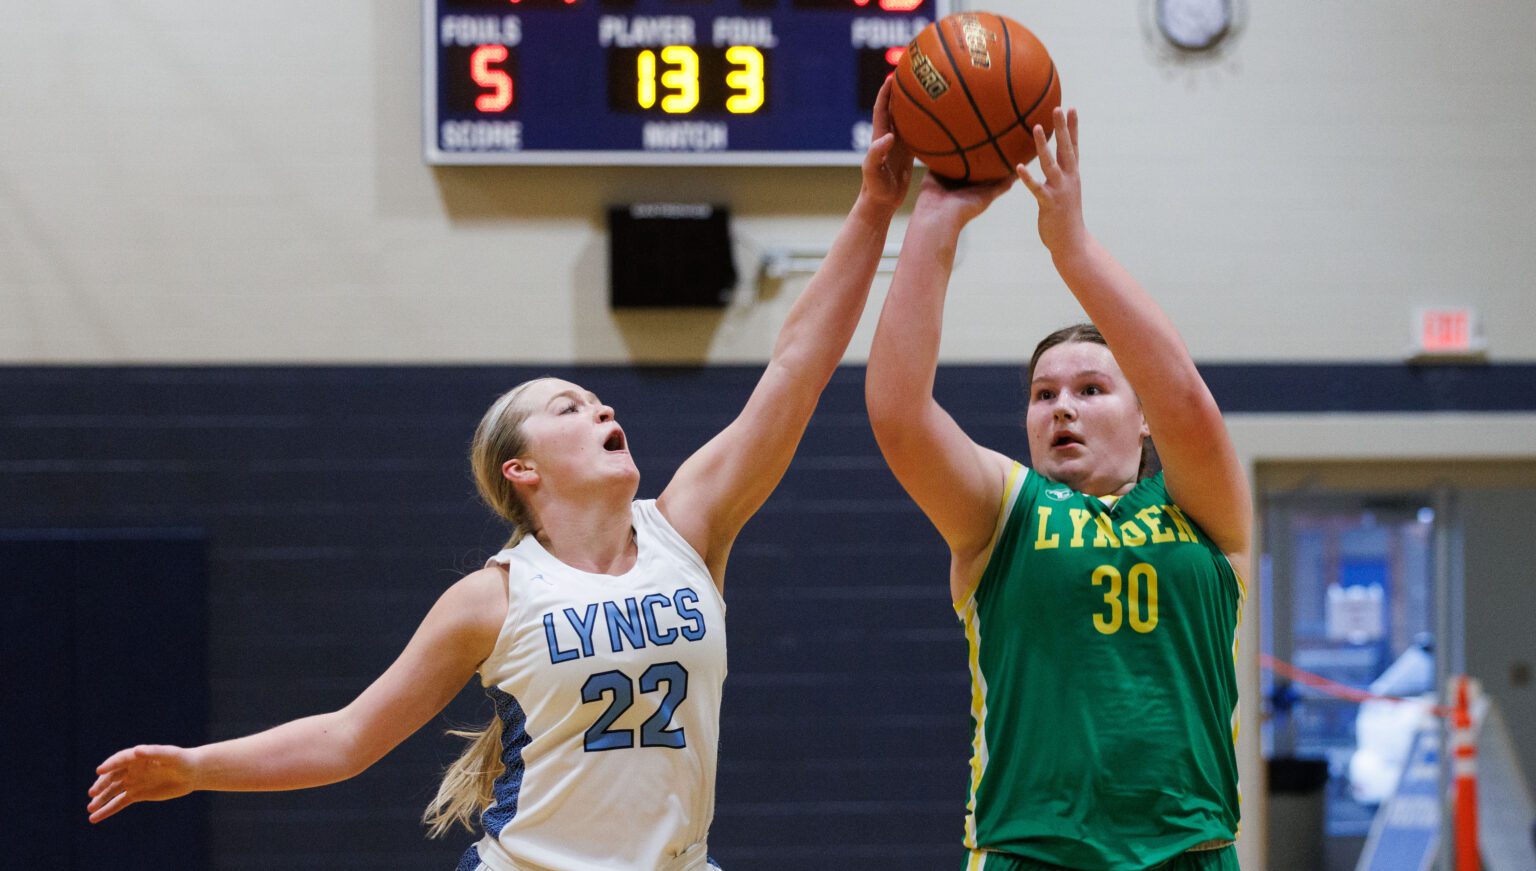 Lynden Christian’s Reganne Arnold blocks a shot by Lynden’s Payton Mills Feb. 4 in the fourth quarter of the Lyncs' 58-50 win over the Lions.